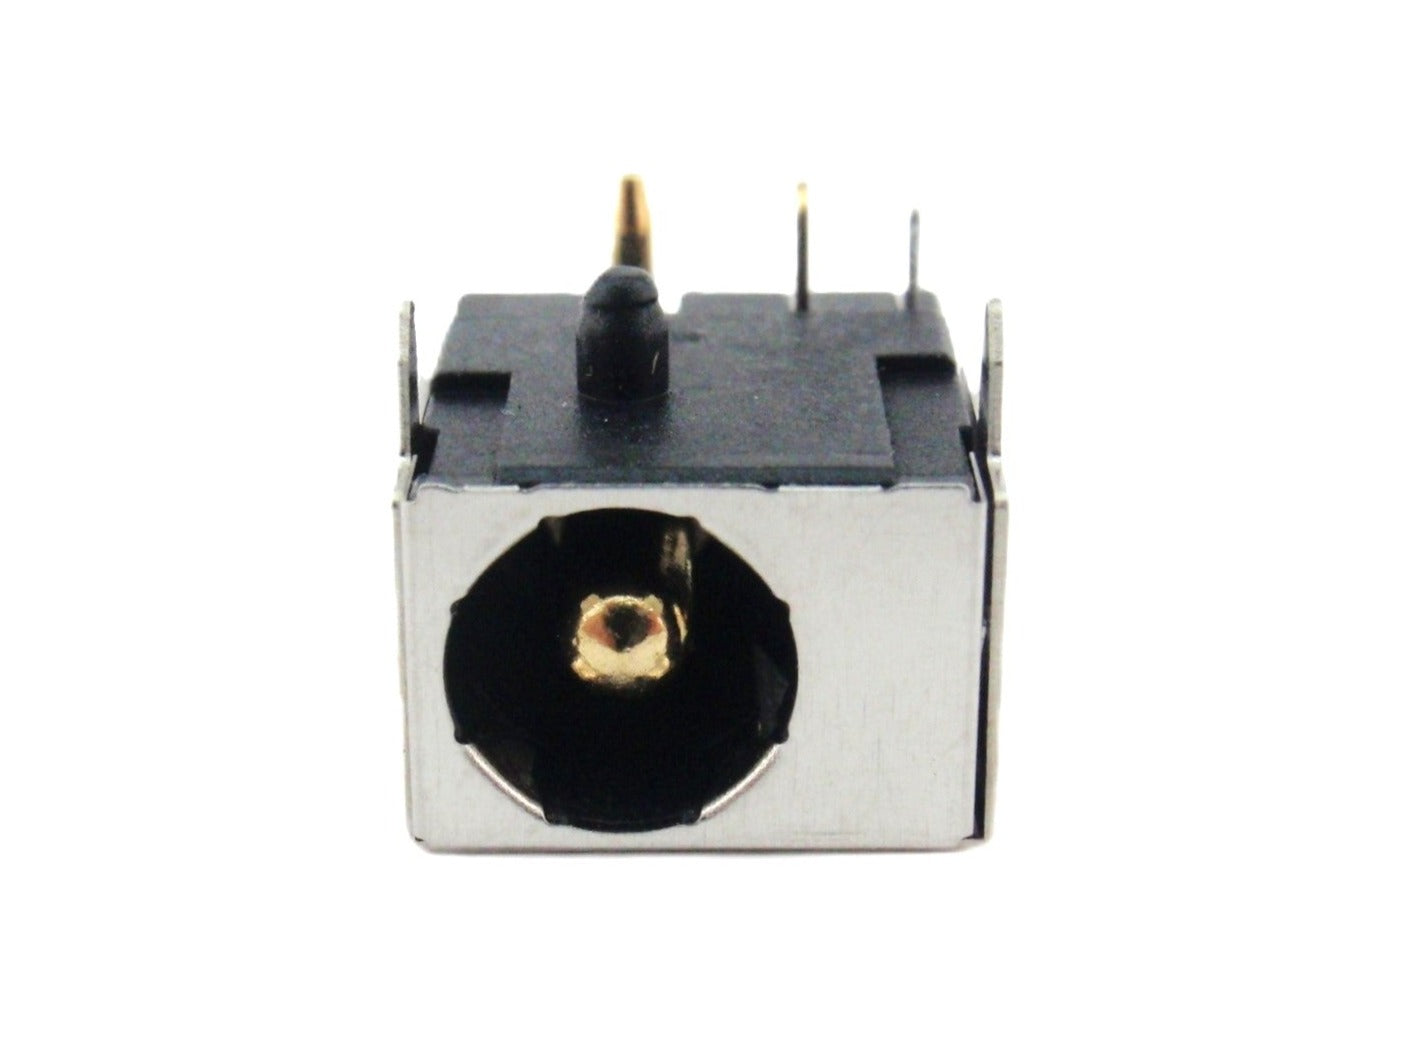 ASUS DC In Power Jack Charging Connector B33E N45 N45S N45SF U31 U31F U31J U31JC U31SD U31SG U33JC U35 X35 X35JC X35JG X35JF X35F X35S X35SD X35SG